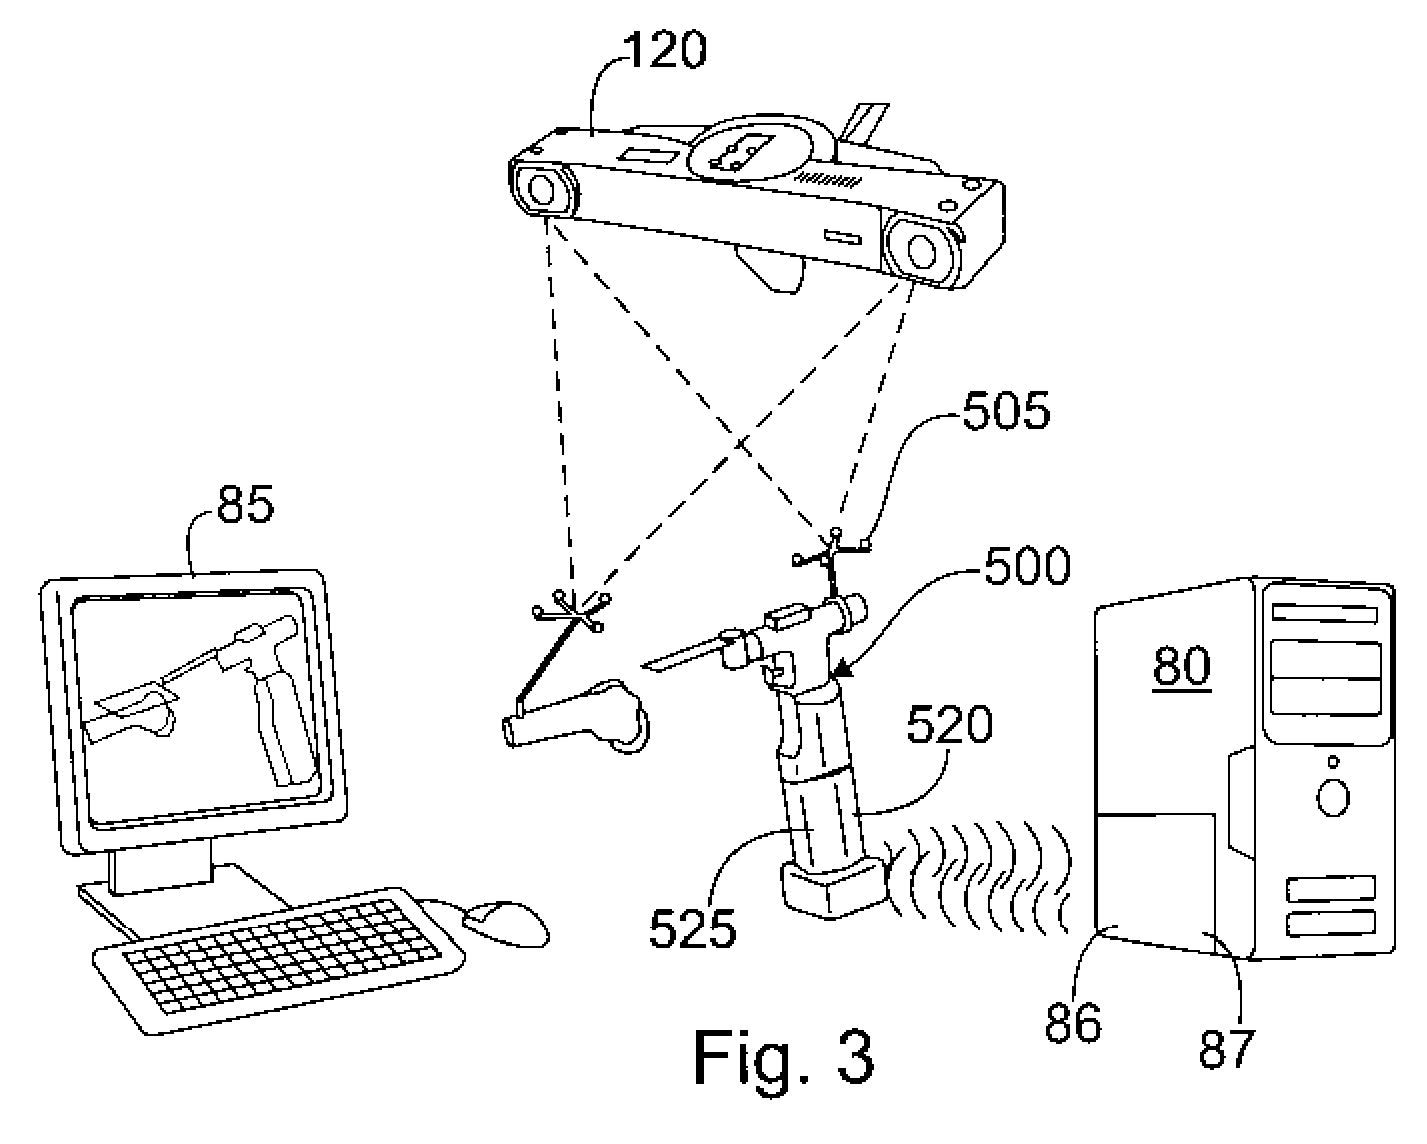 Method and Apparatus for Computer Aided Surgery